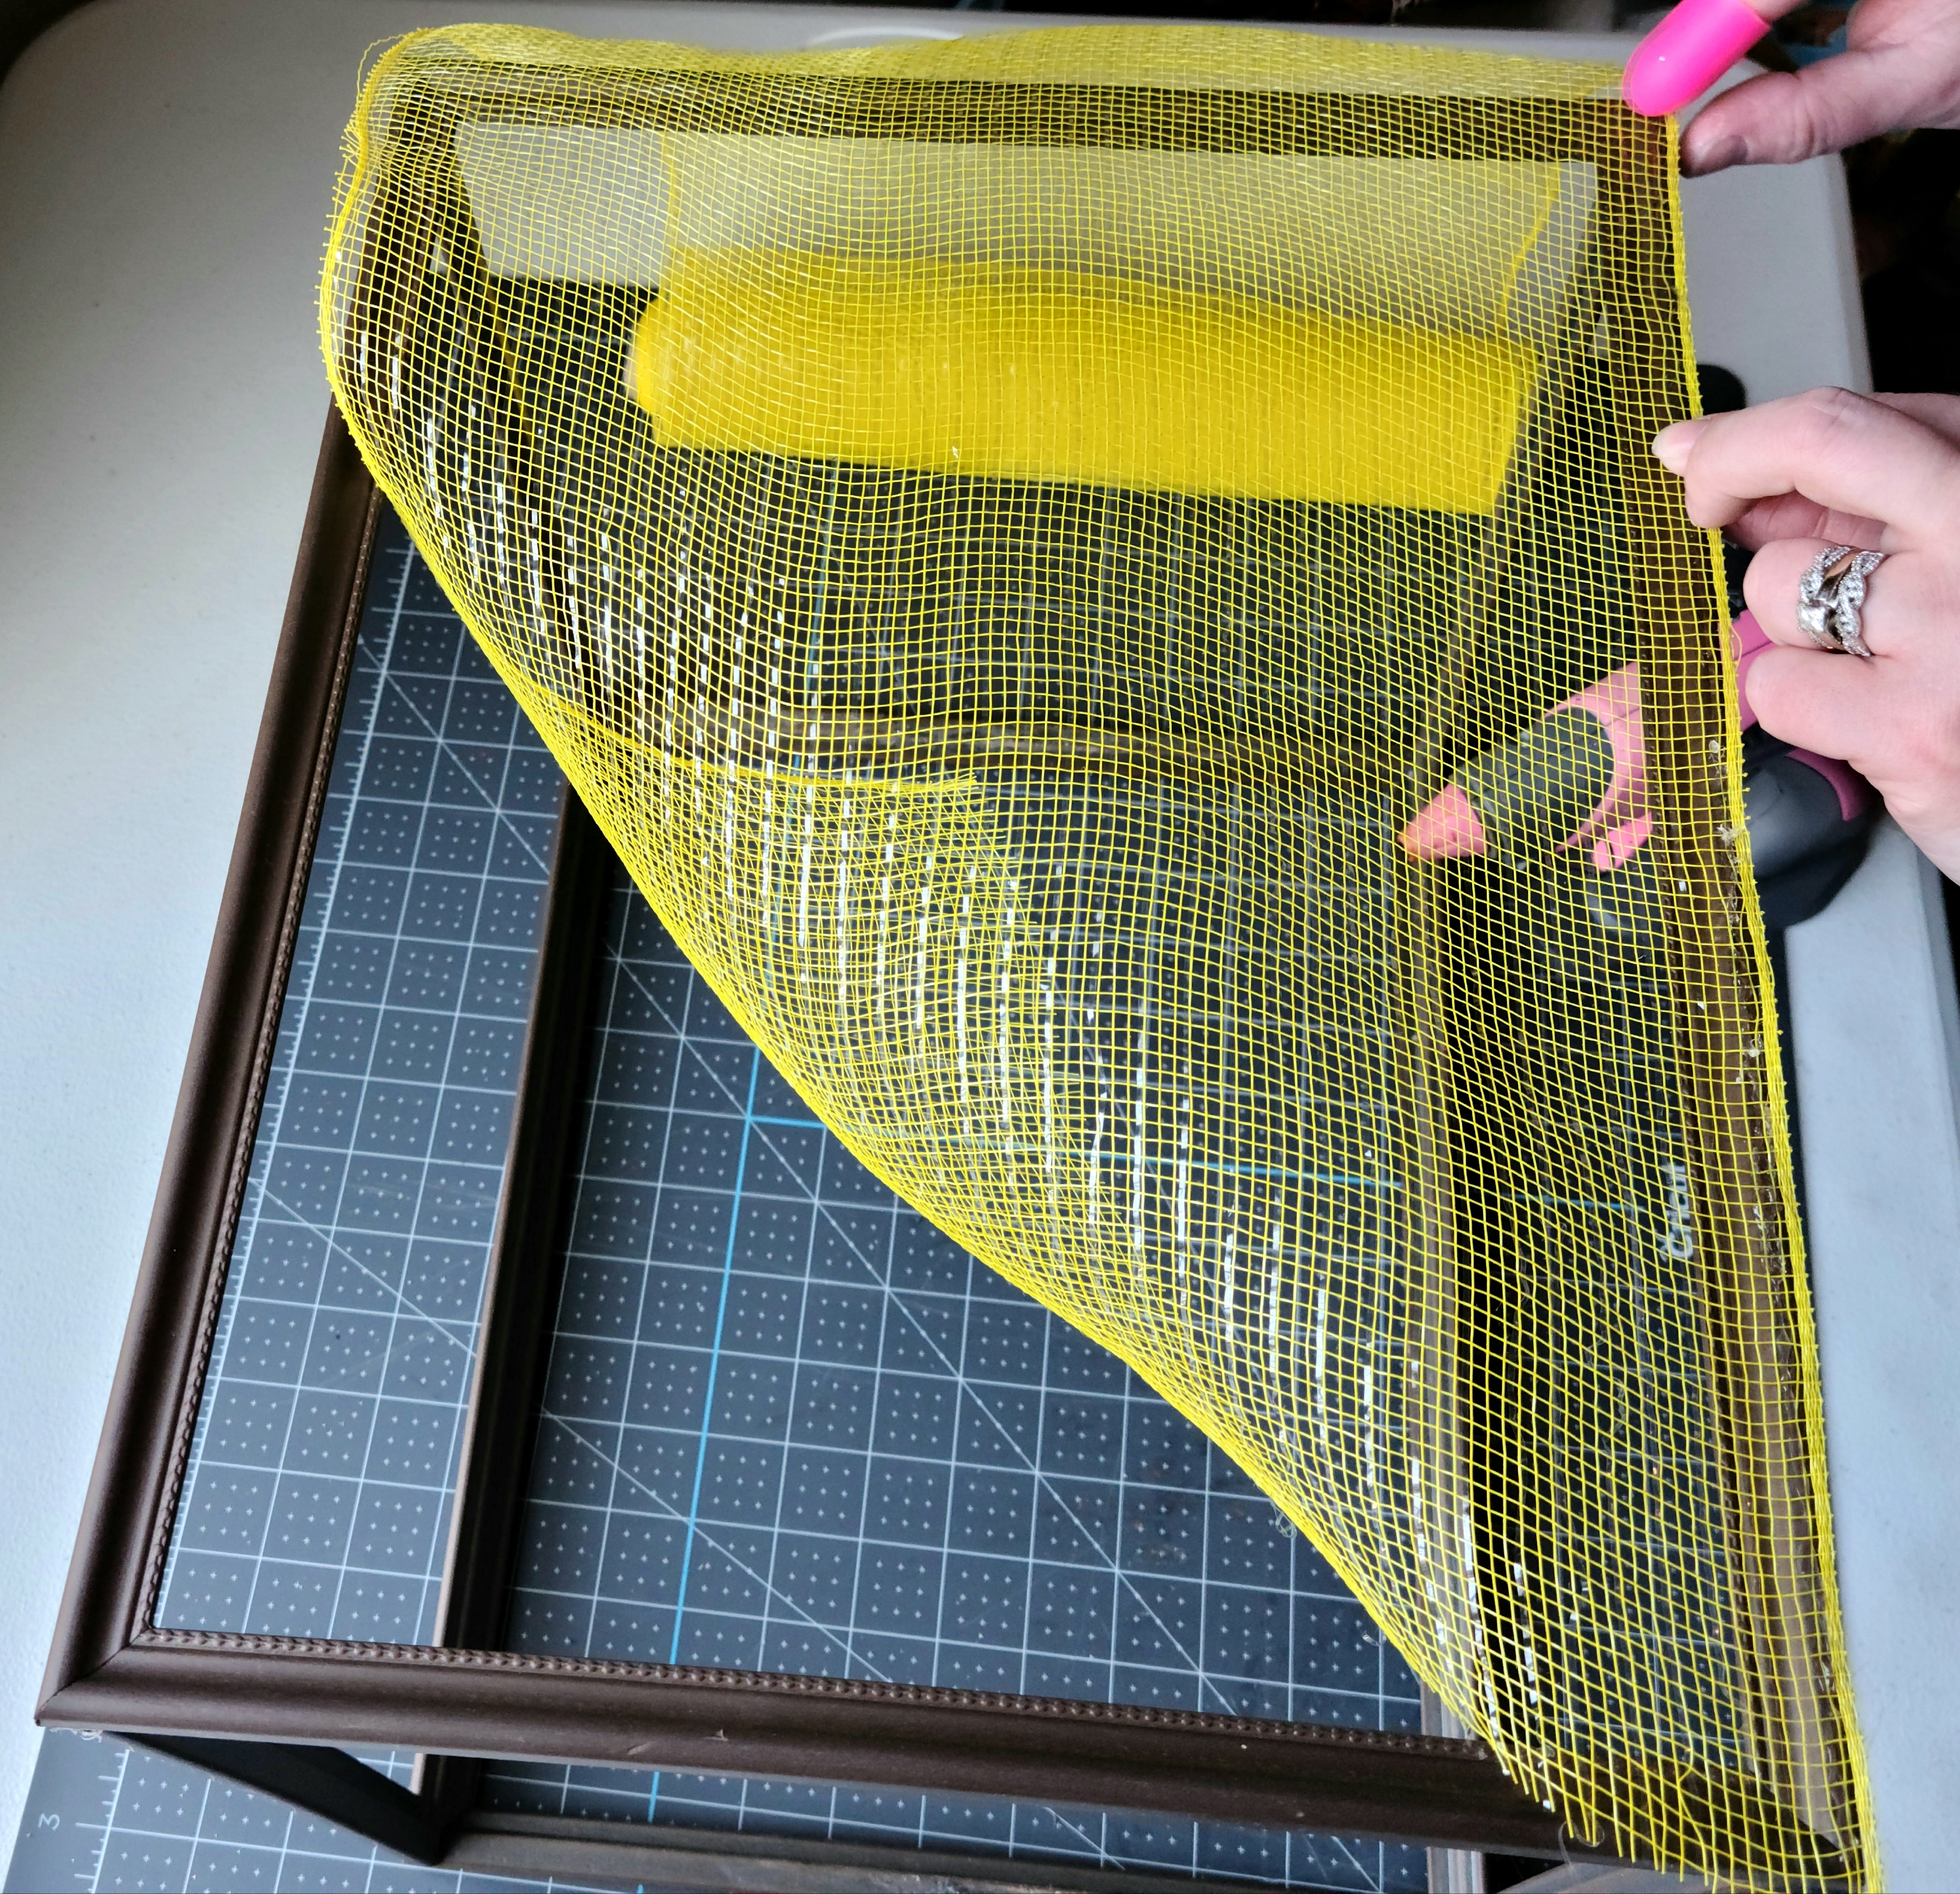 Pressing the deco mesh on the hot glue that was added on the frame of the DIY lighted gift box. The first side on the box is now glued down.